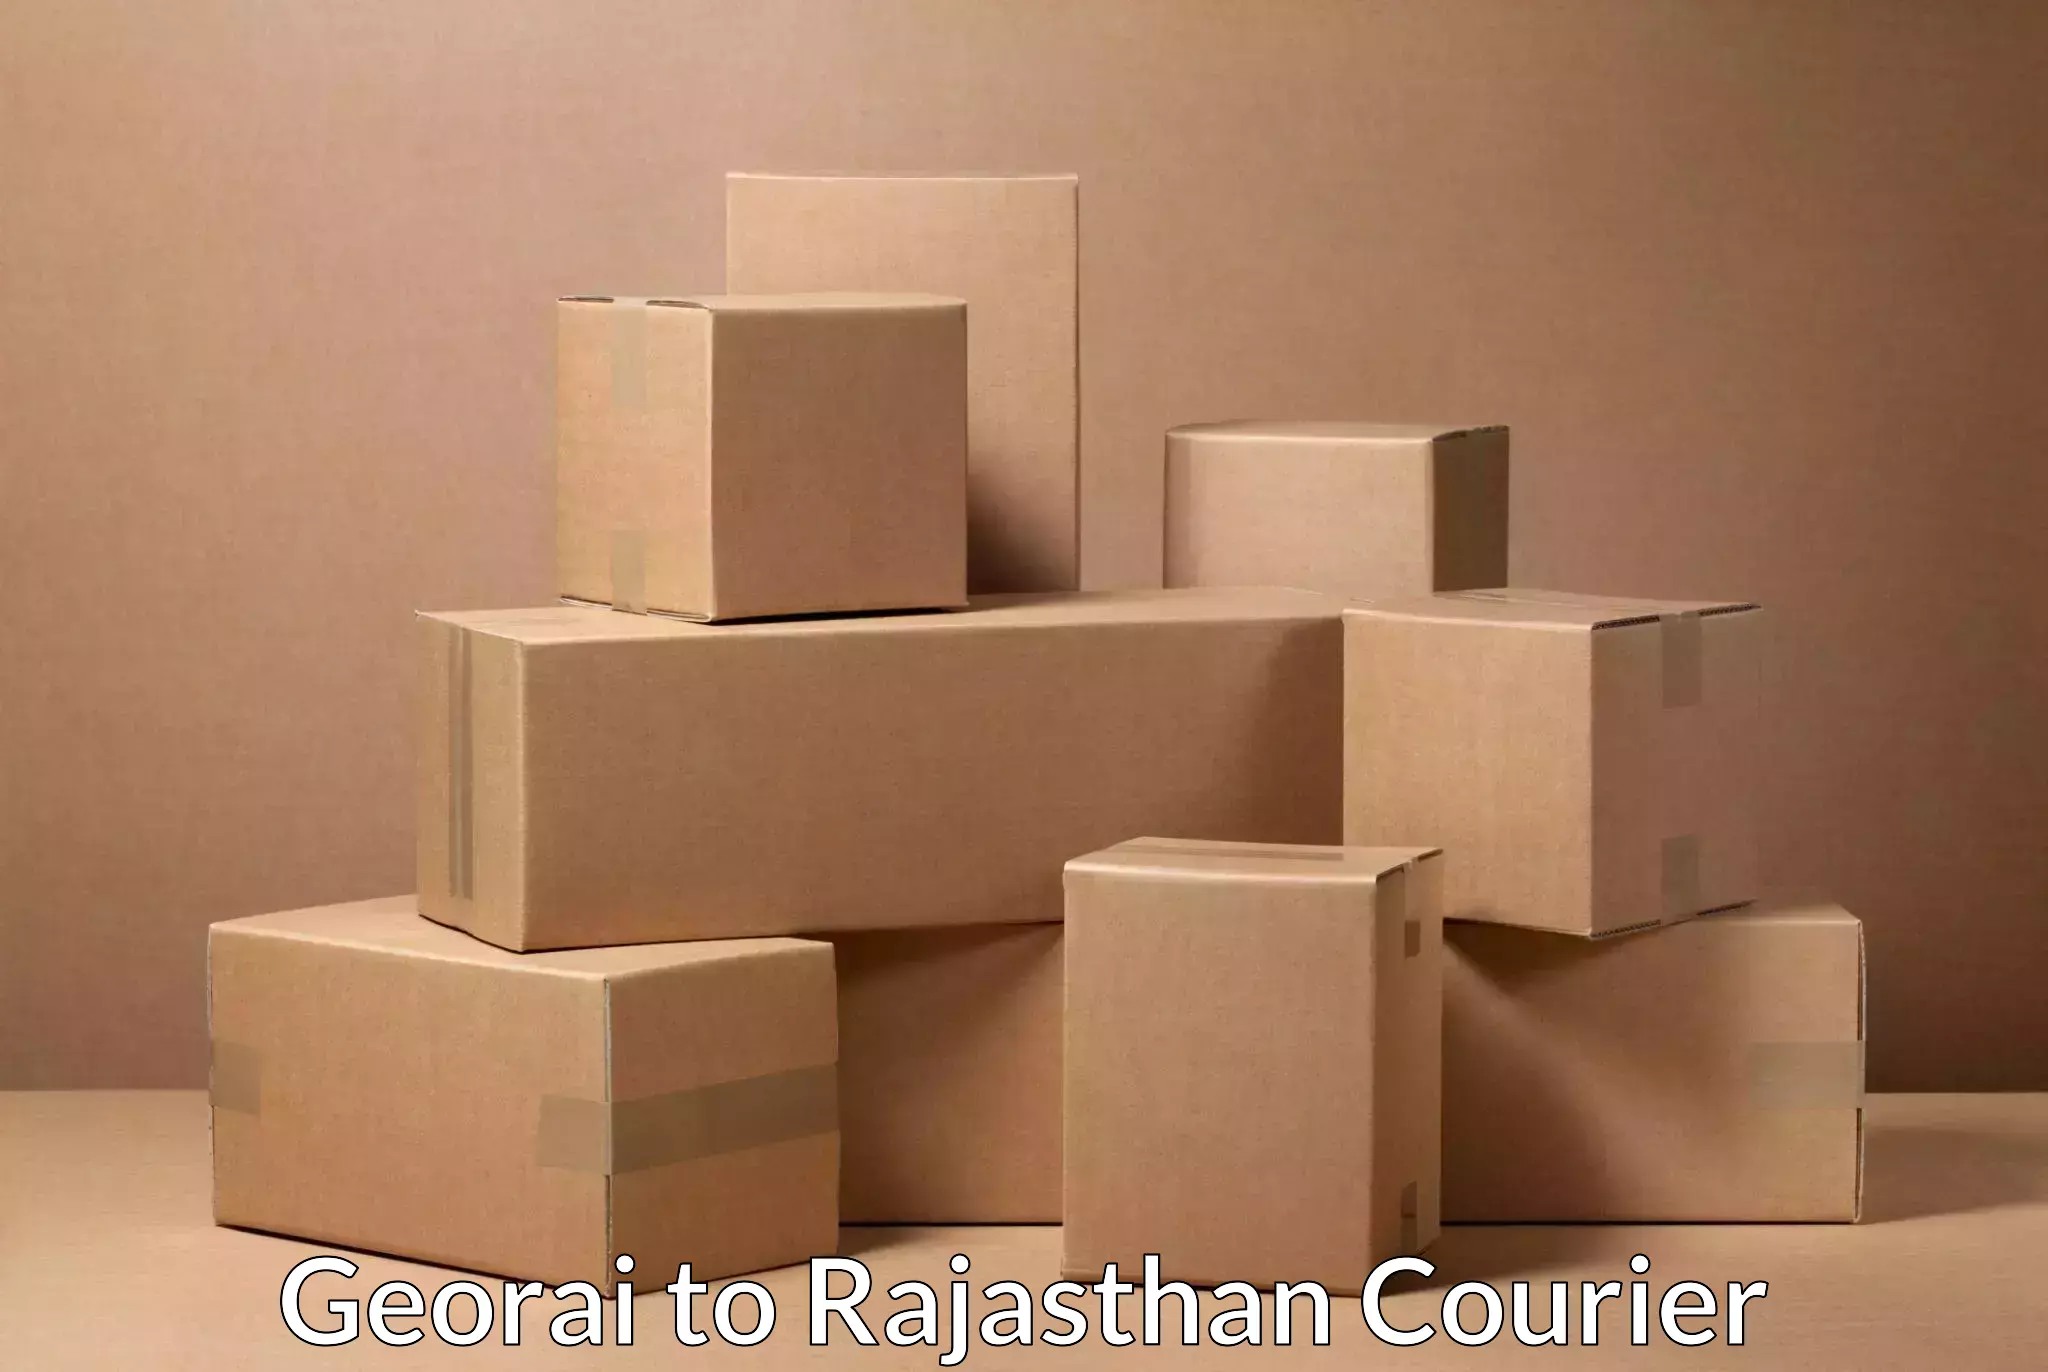 Supply chain delivery Georai to Rajasthan